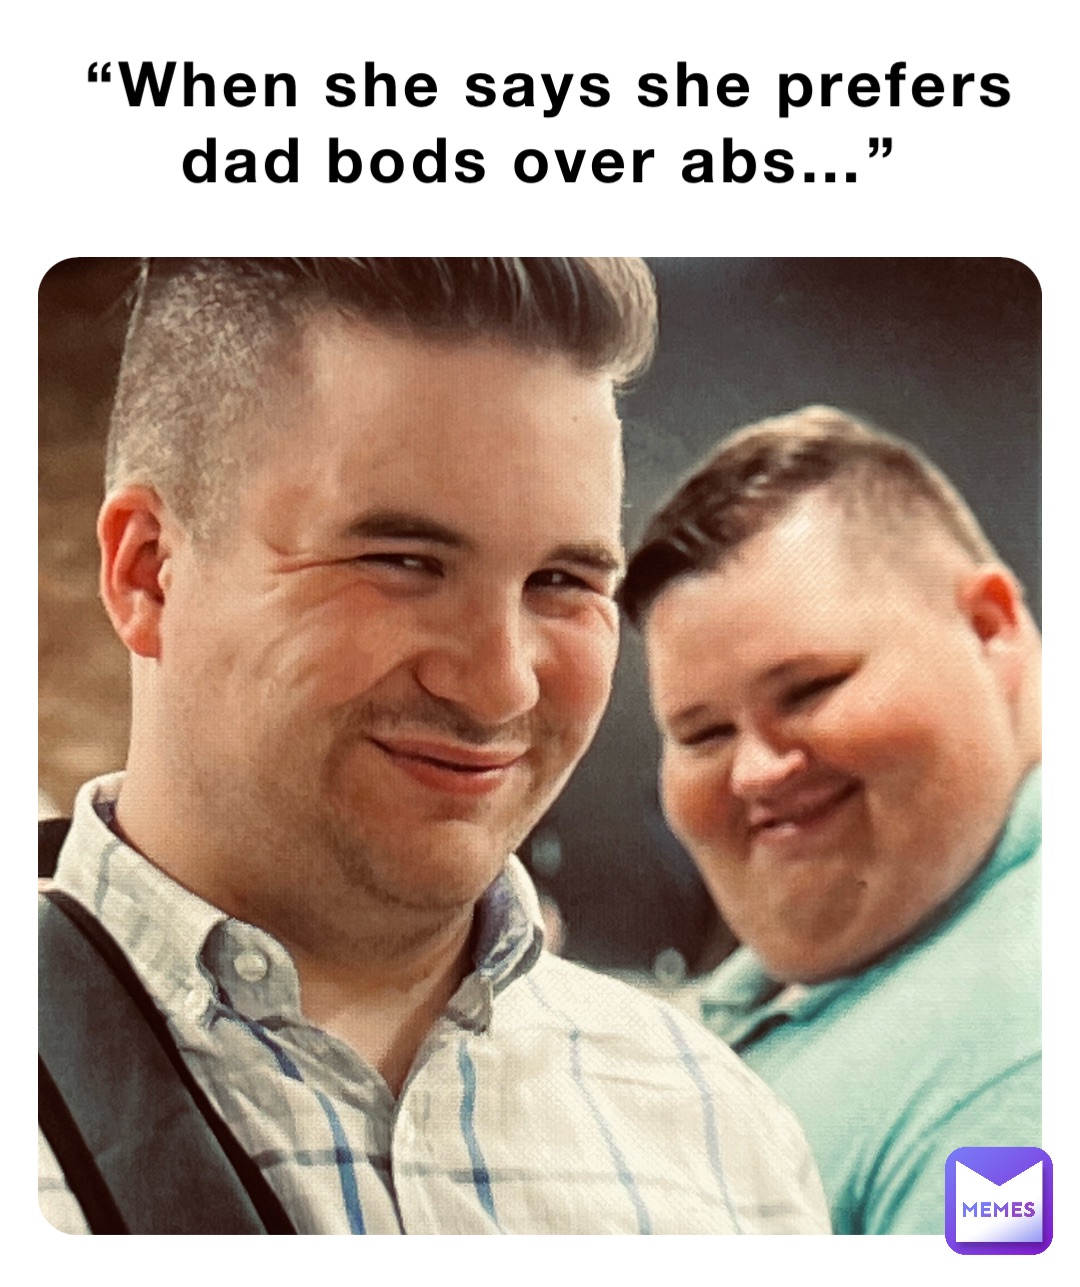 “When she says she prefers dad bods over abs…”